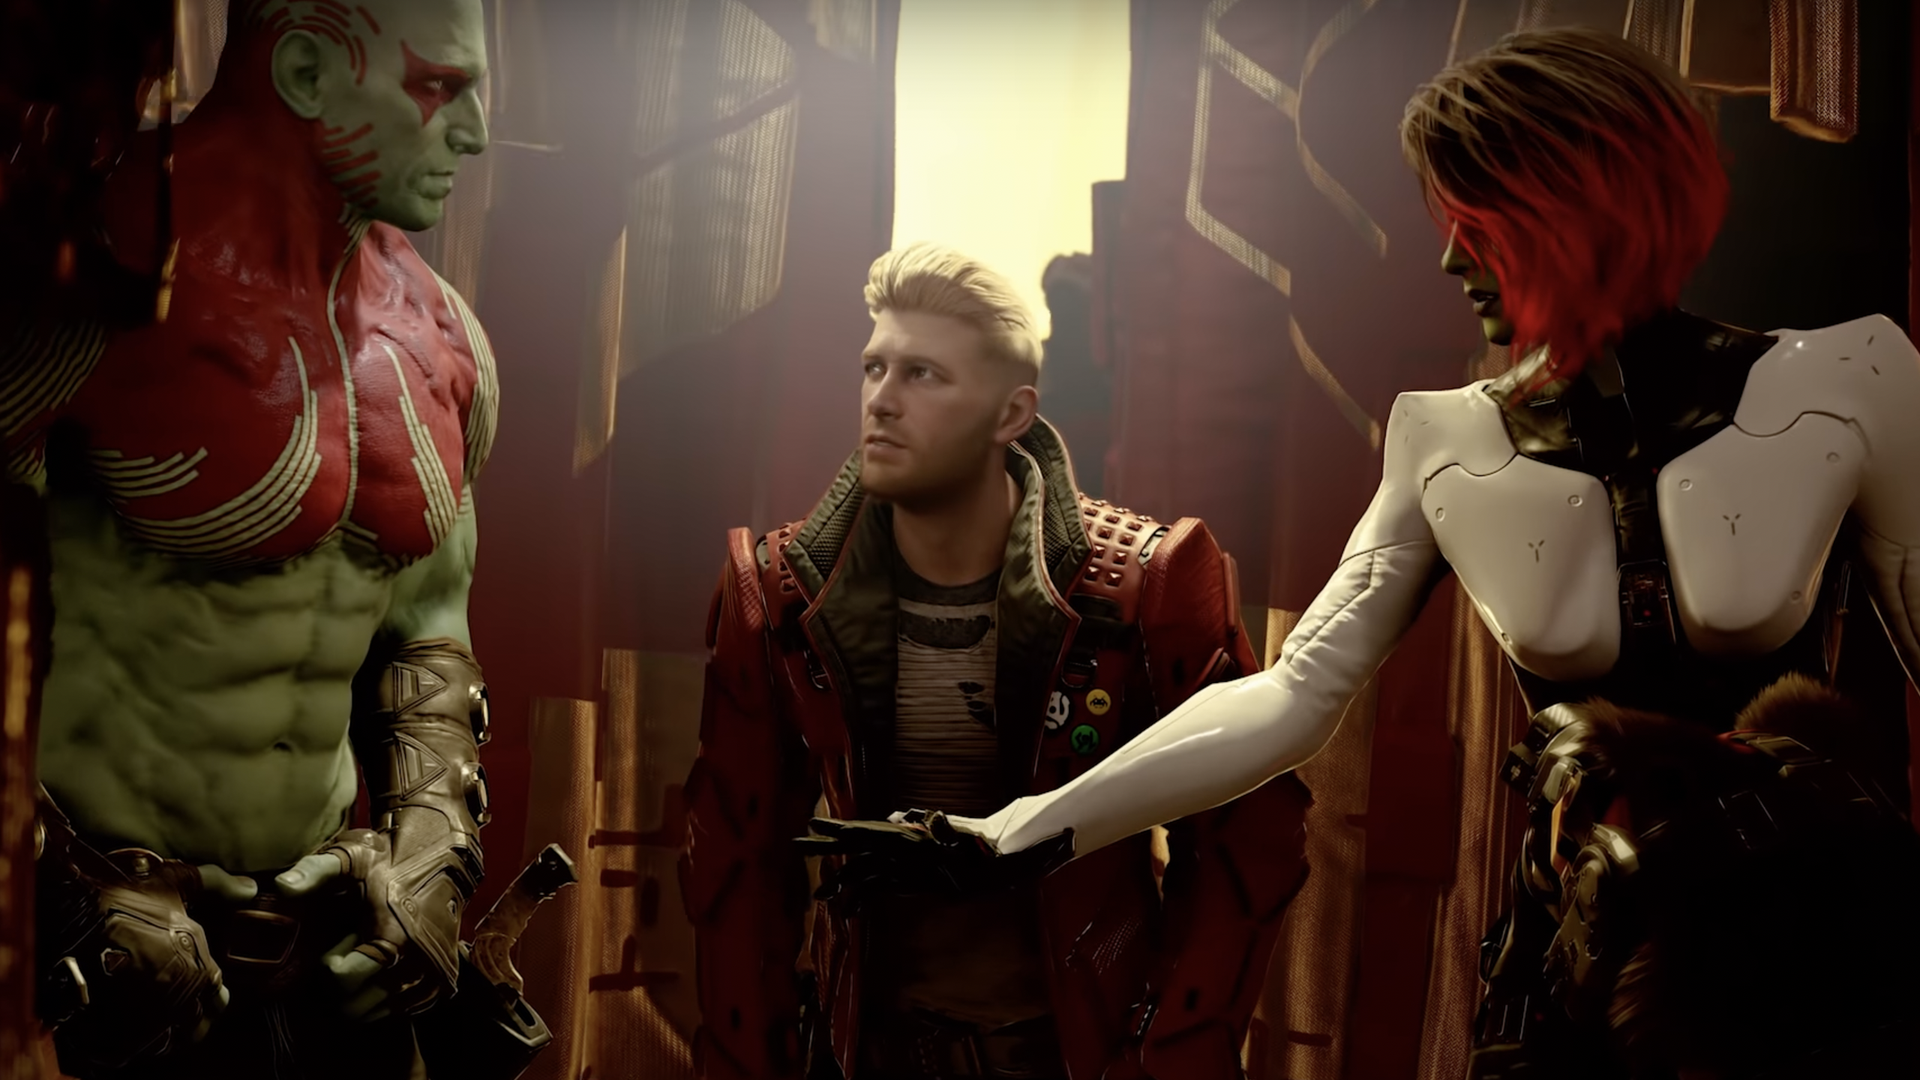 Screenshot of an in-game scene from the Guardians of Galaxy game, showing a green muscled man with a white blonde man and a woman with pink hair